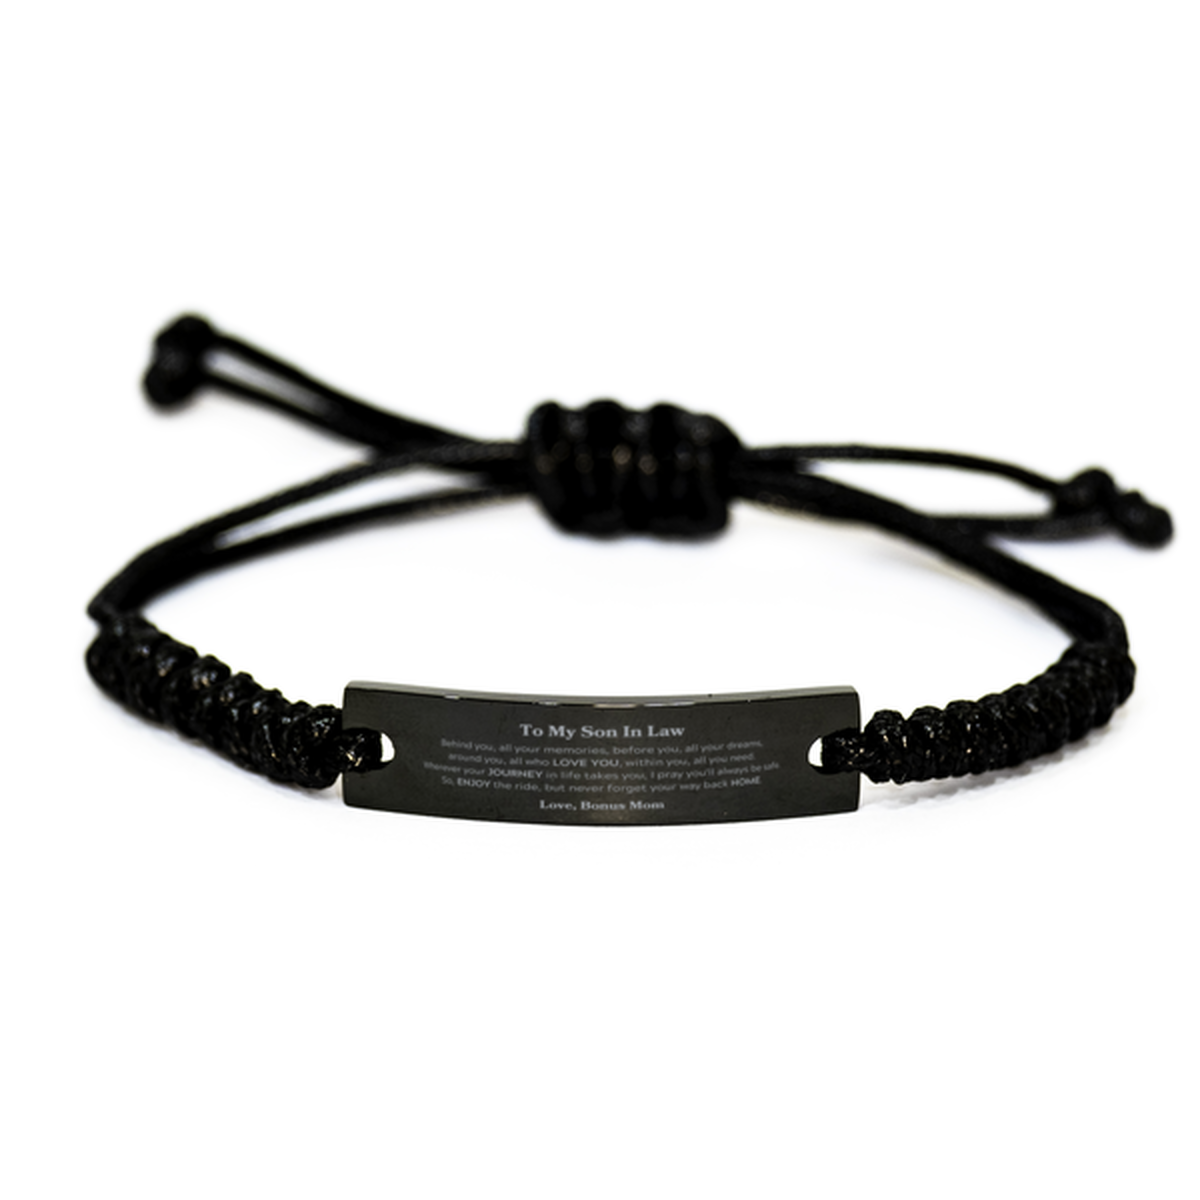 To My Son In Law Graduation Gifts from Bonus Mom, Son In Law Black Rope Bracelet Christmas Birthday Gifts for Son In Law Behind you, all your memories, before you, all your dreams. Love, Bonus Mom